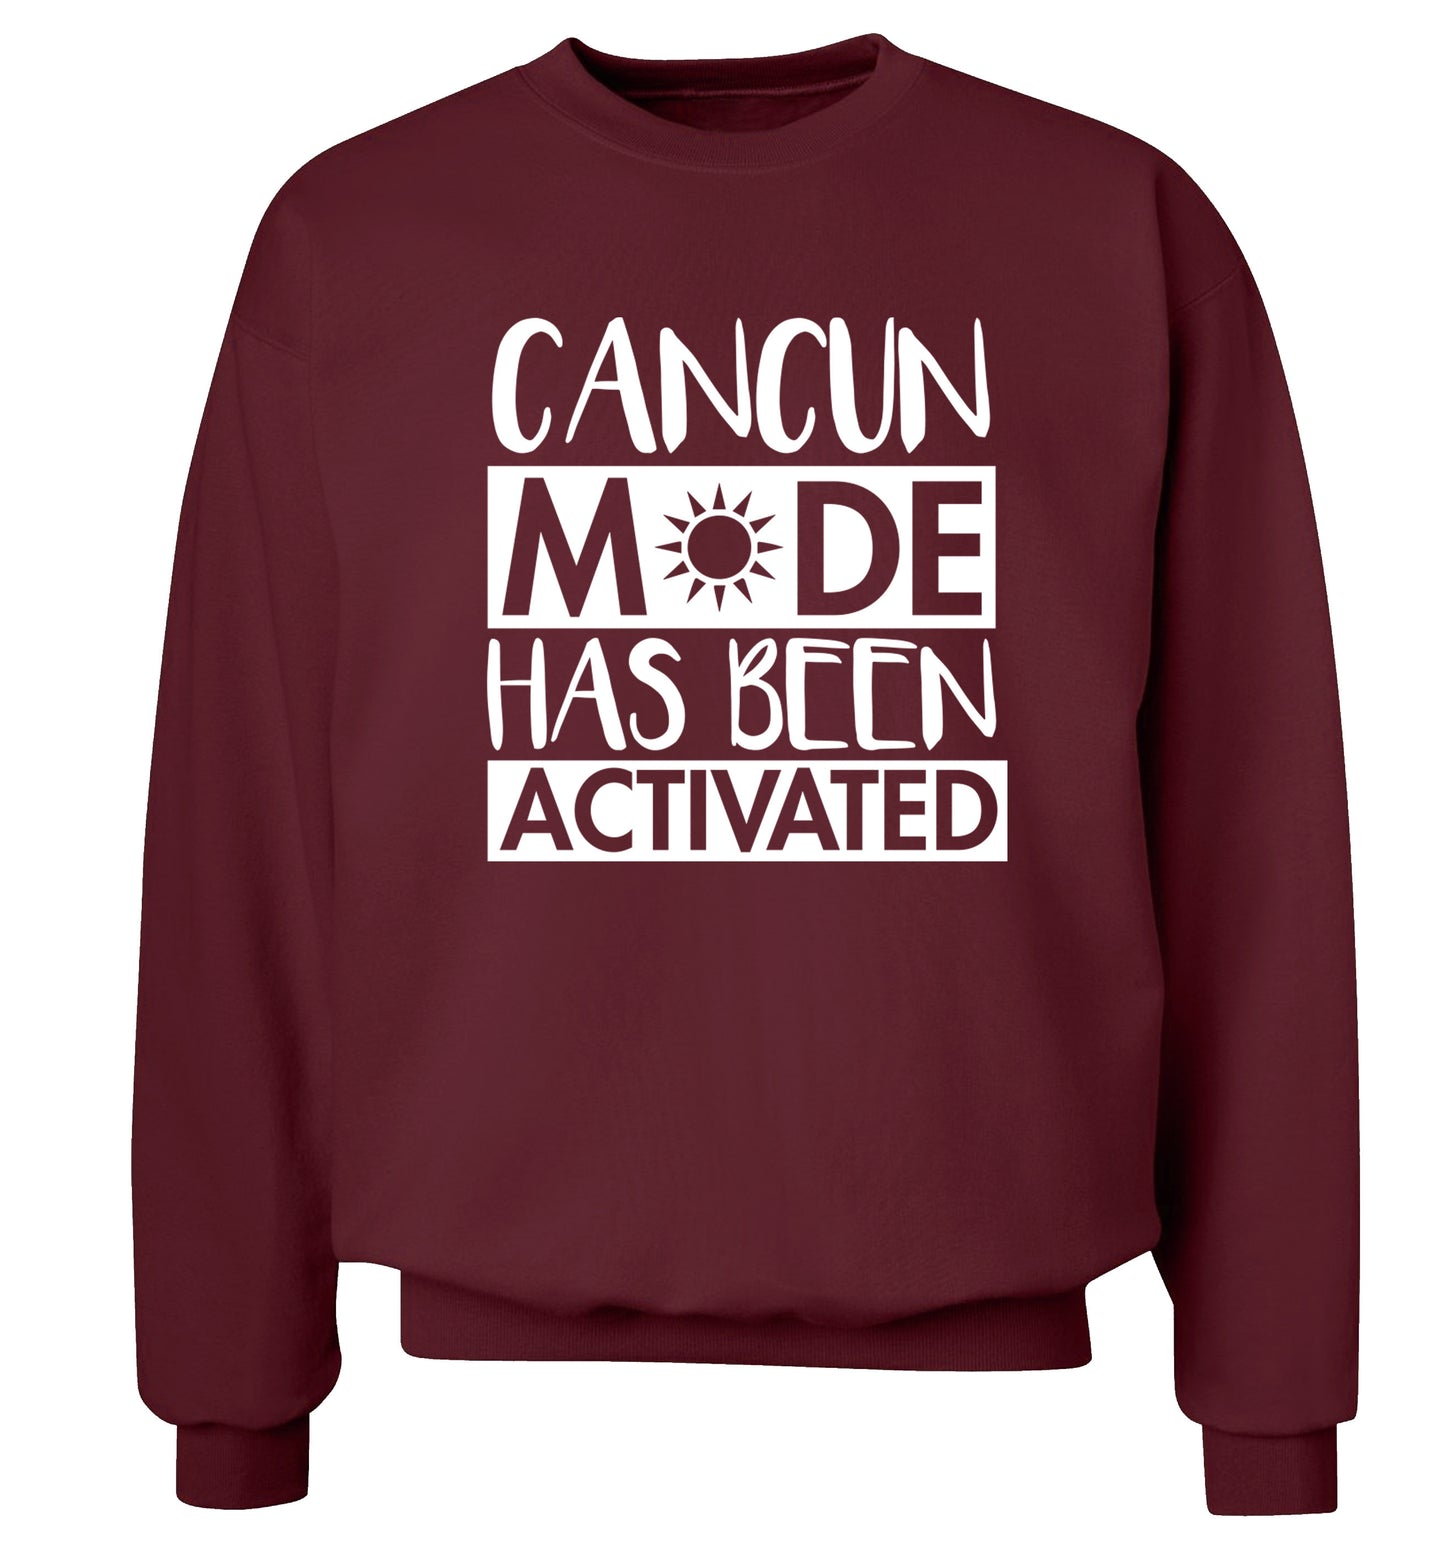 Cancun mode has been activated Adult's unisex maroon Sweater 2XL